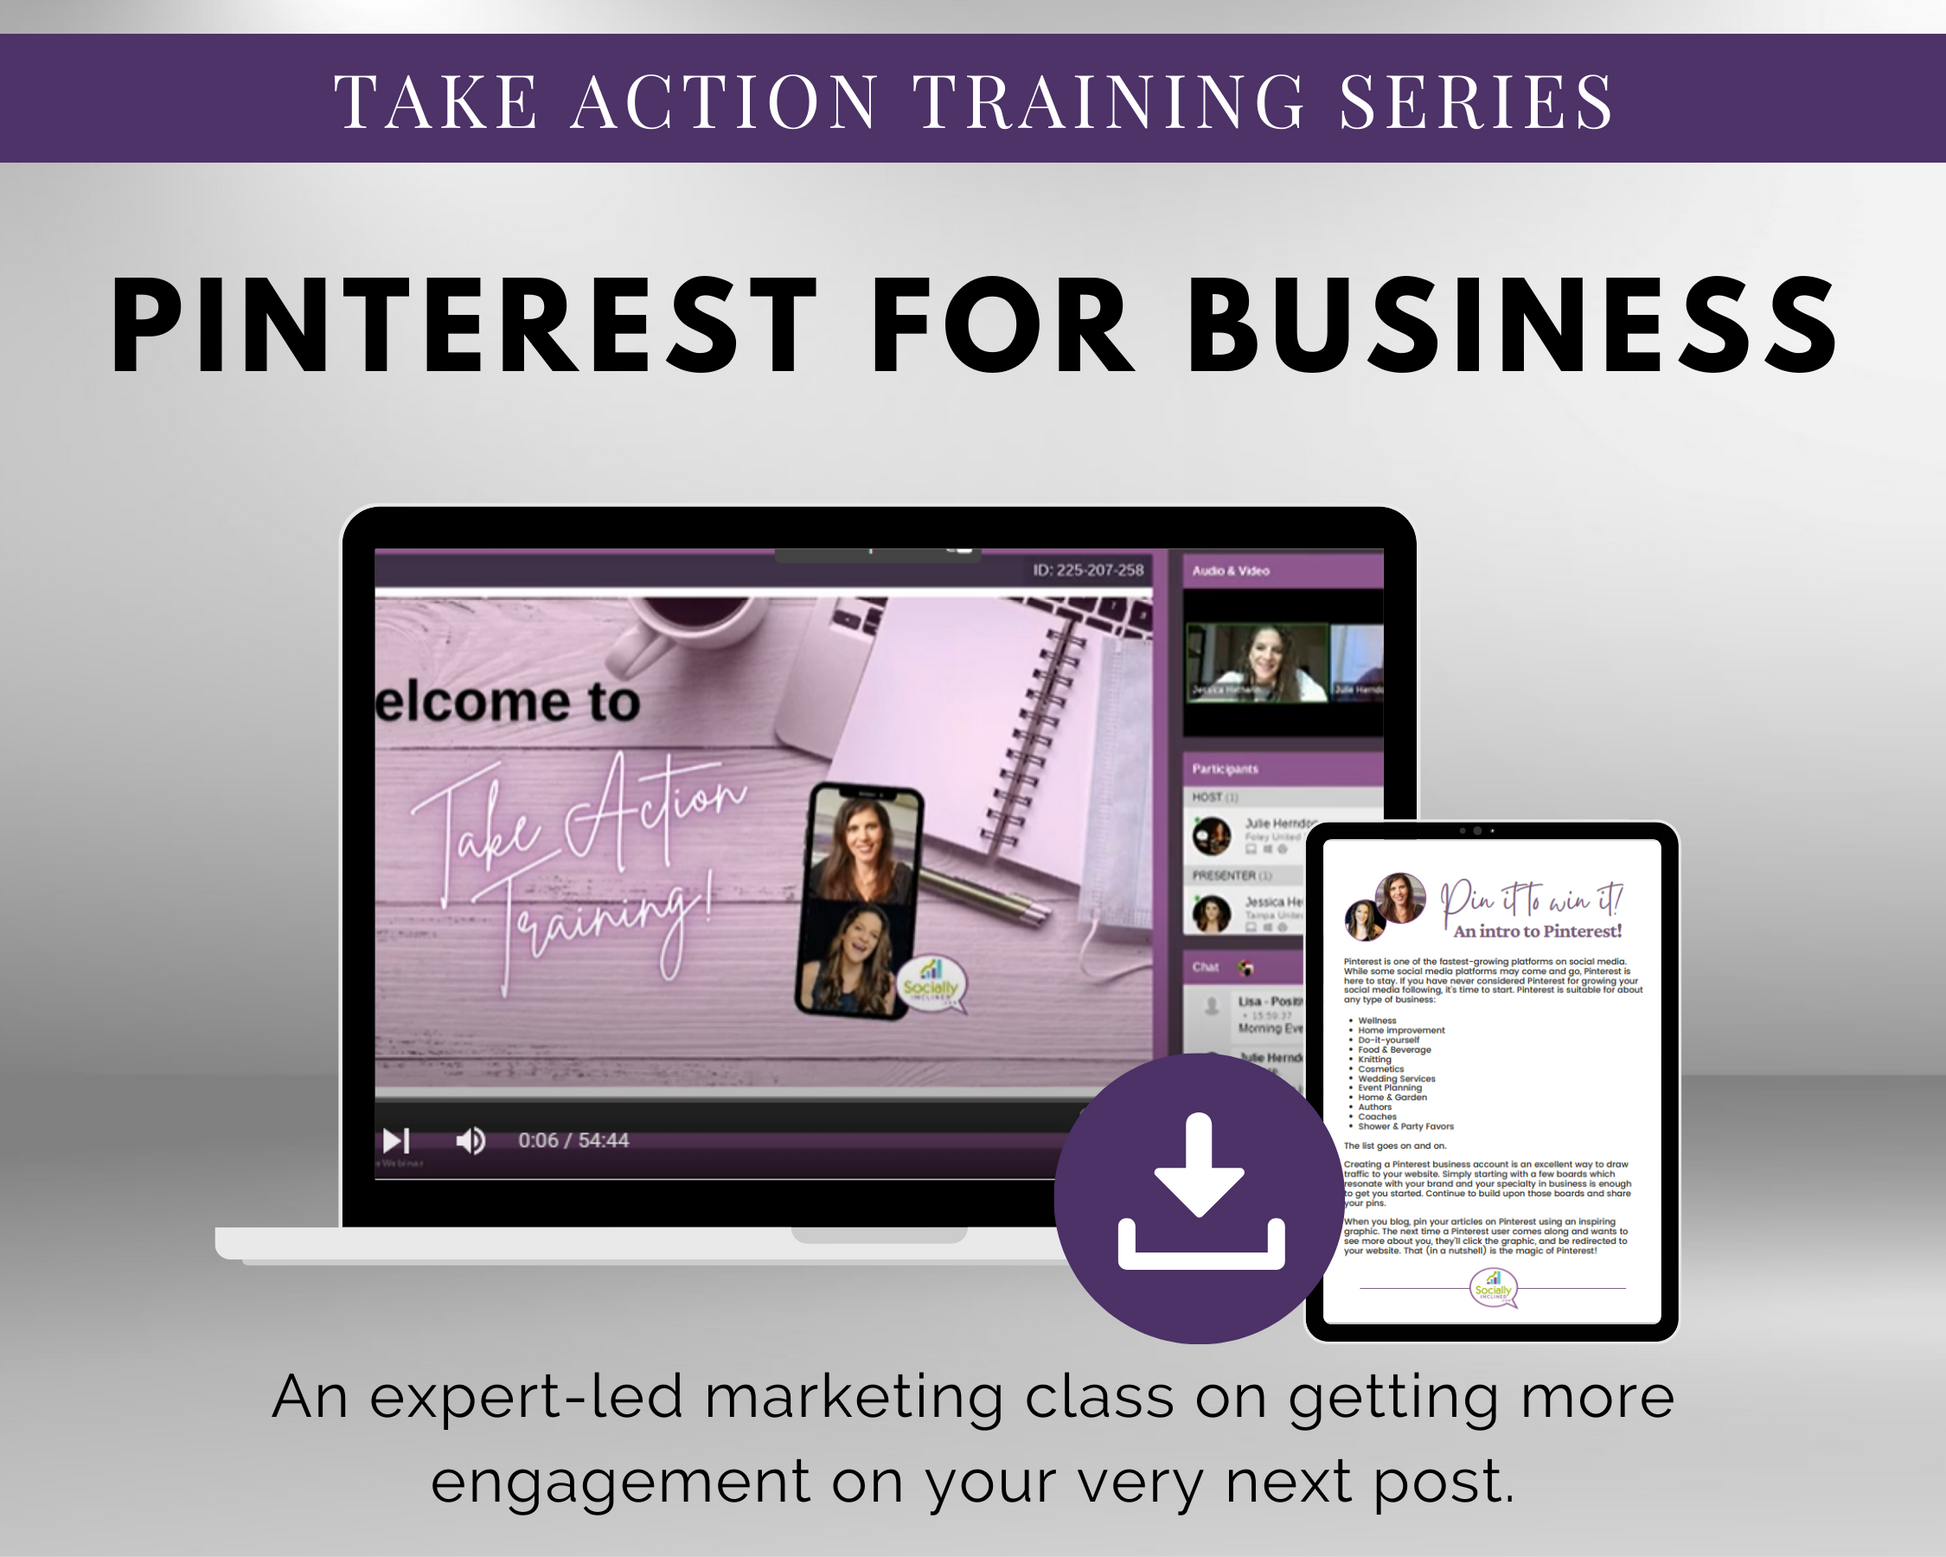 Get Socially Inclined's TAT - Pinterest For Business Masterclass